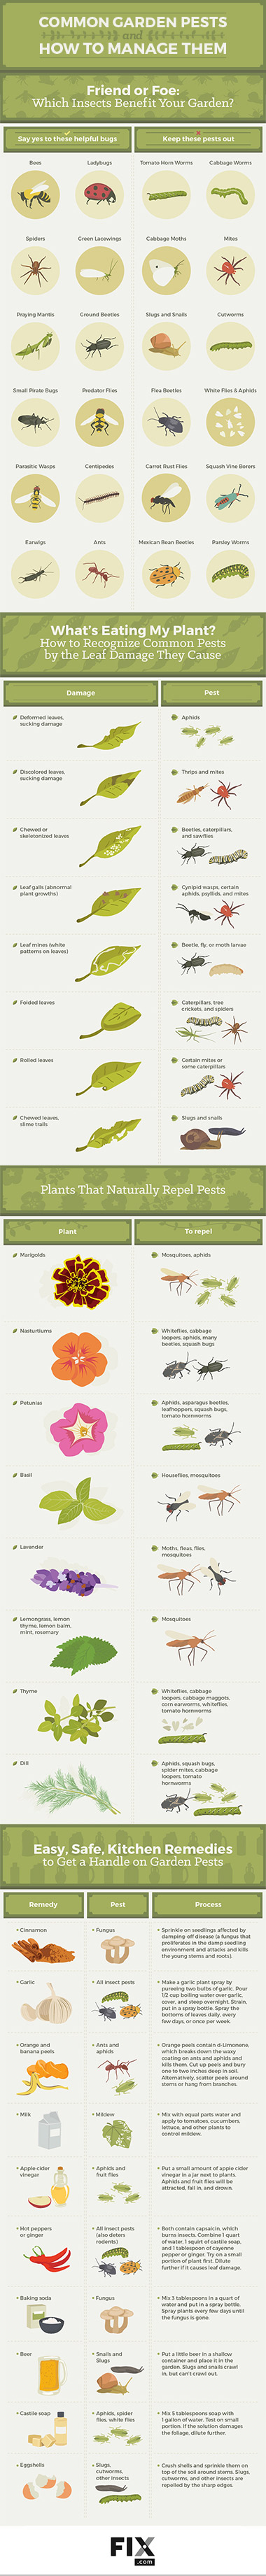 common garden pests and how to manage them